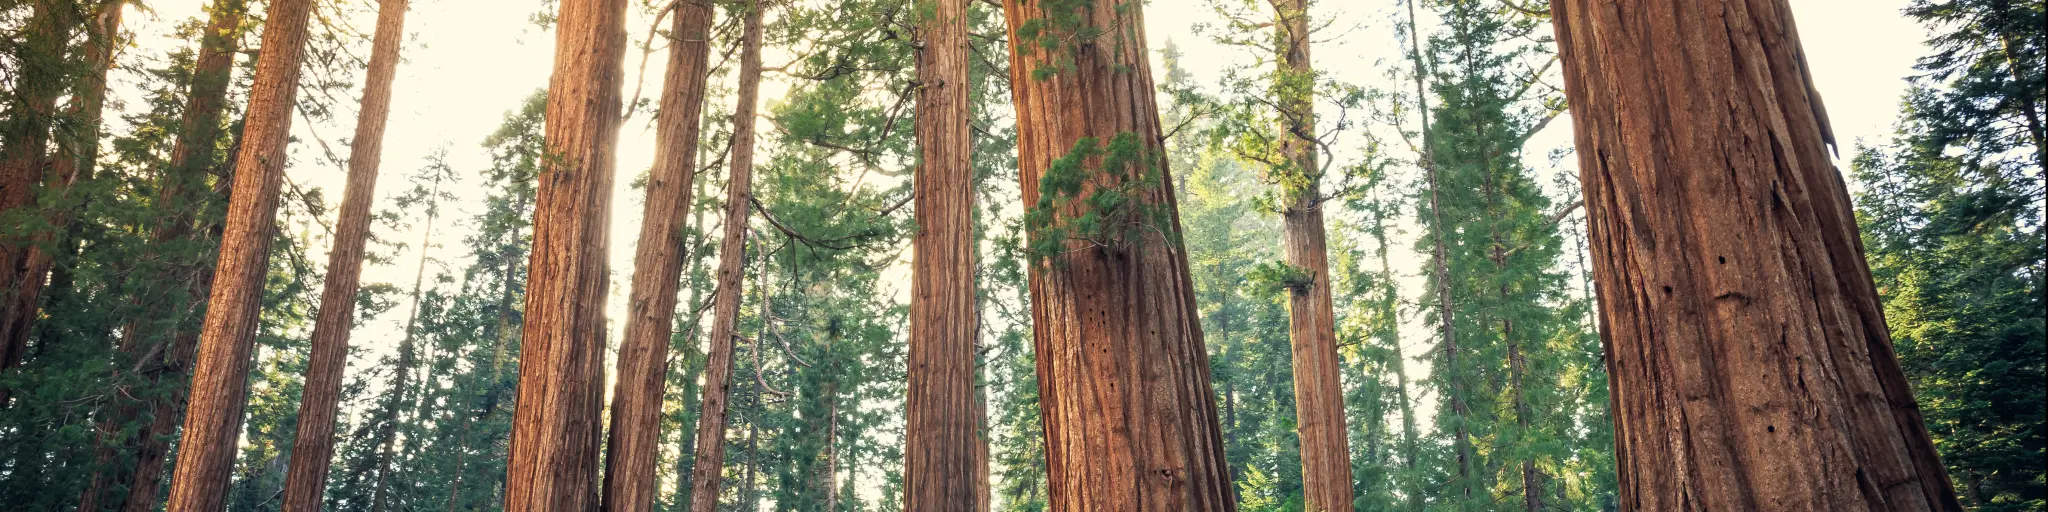 Sequoia Trees Rising to the Sky, Sequoia National Park, California